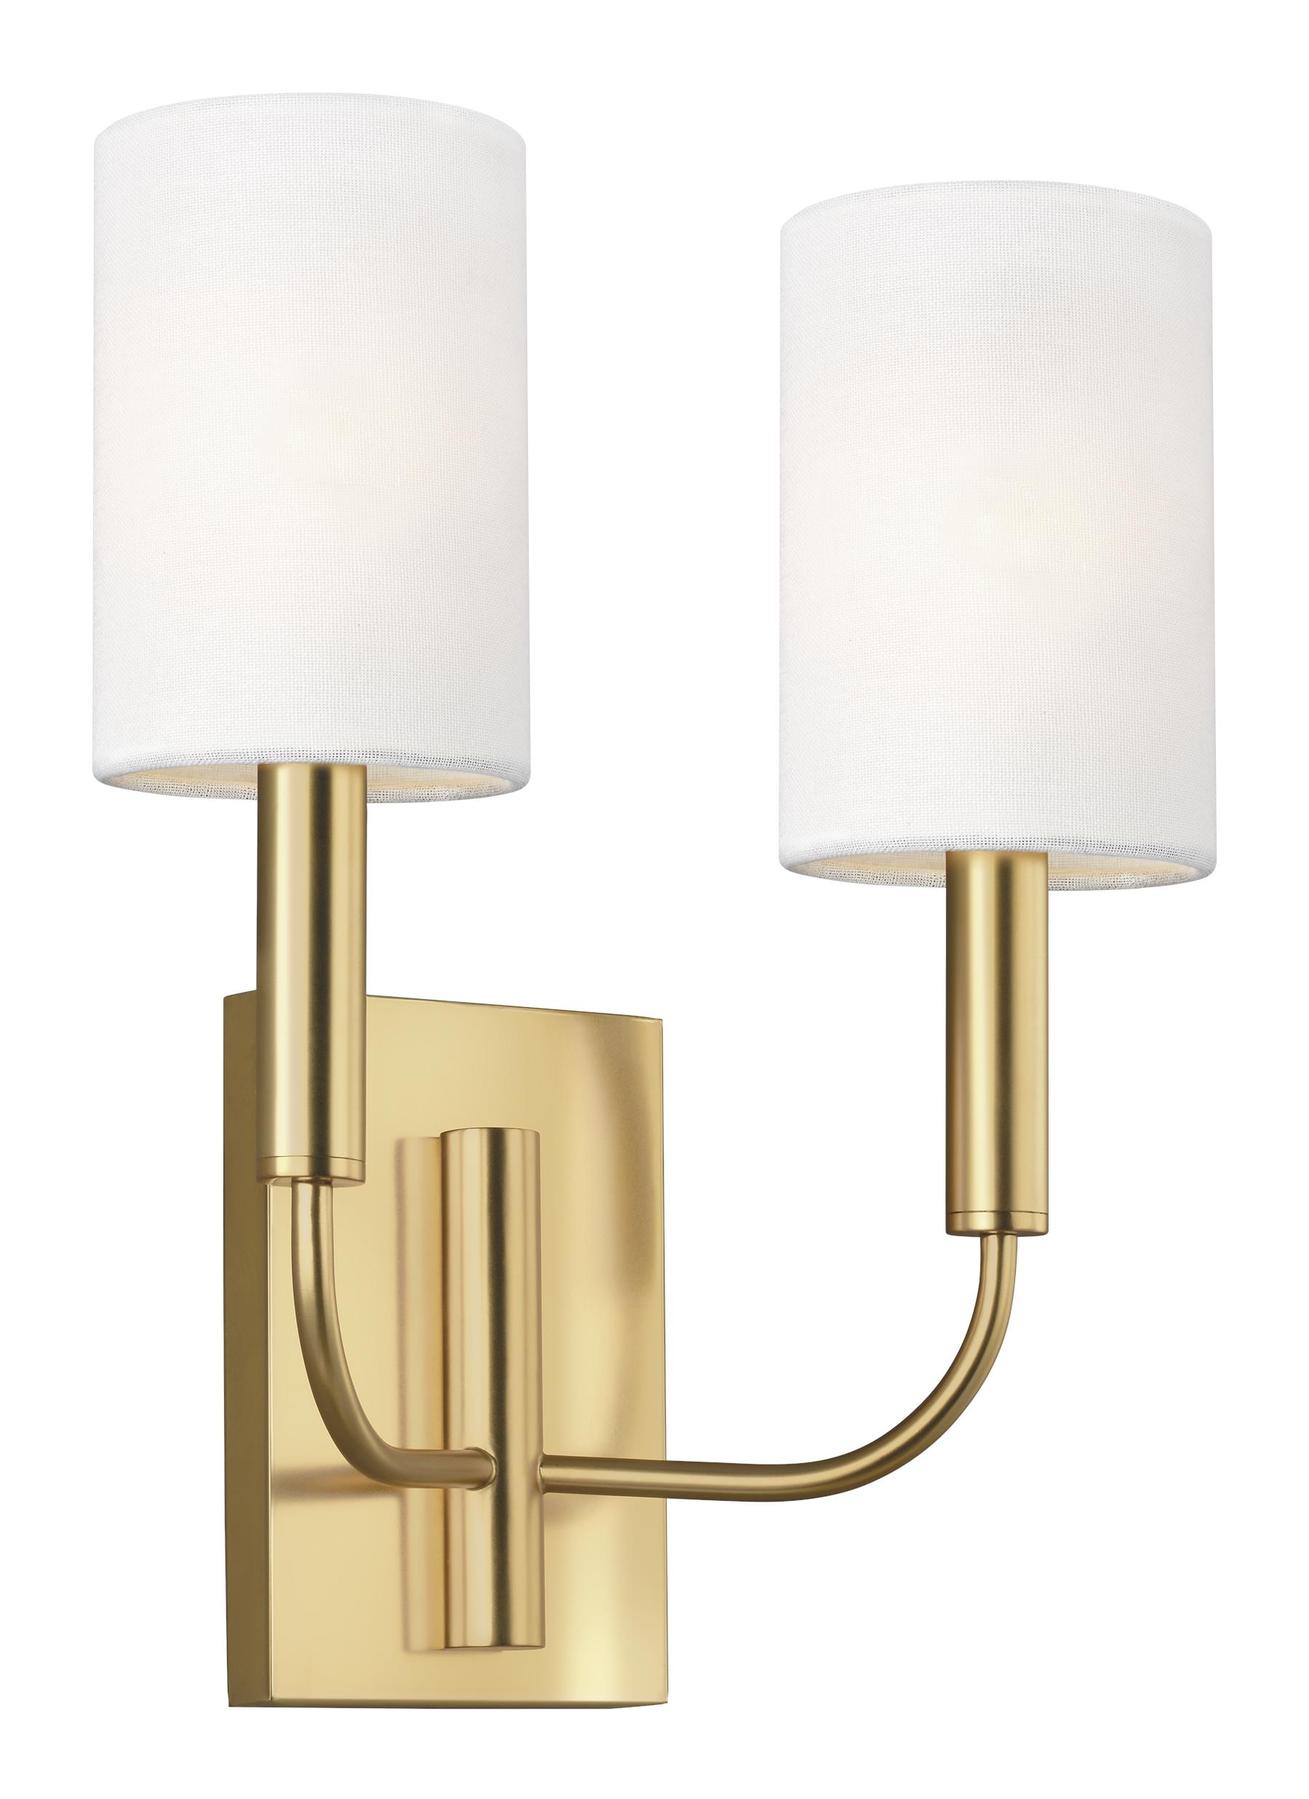 Brianna Wall Sconce by Visual Comfort Studio